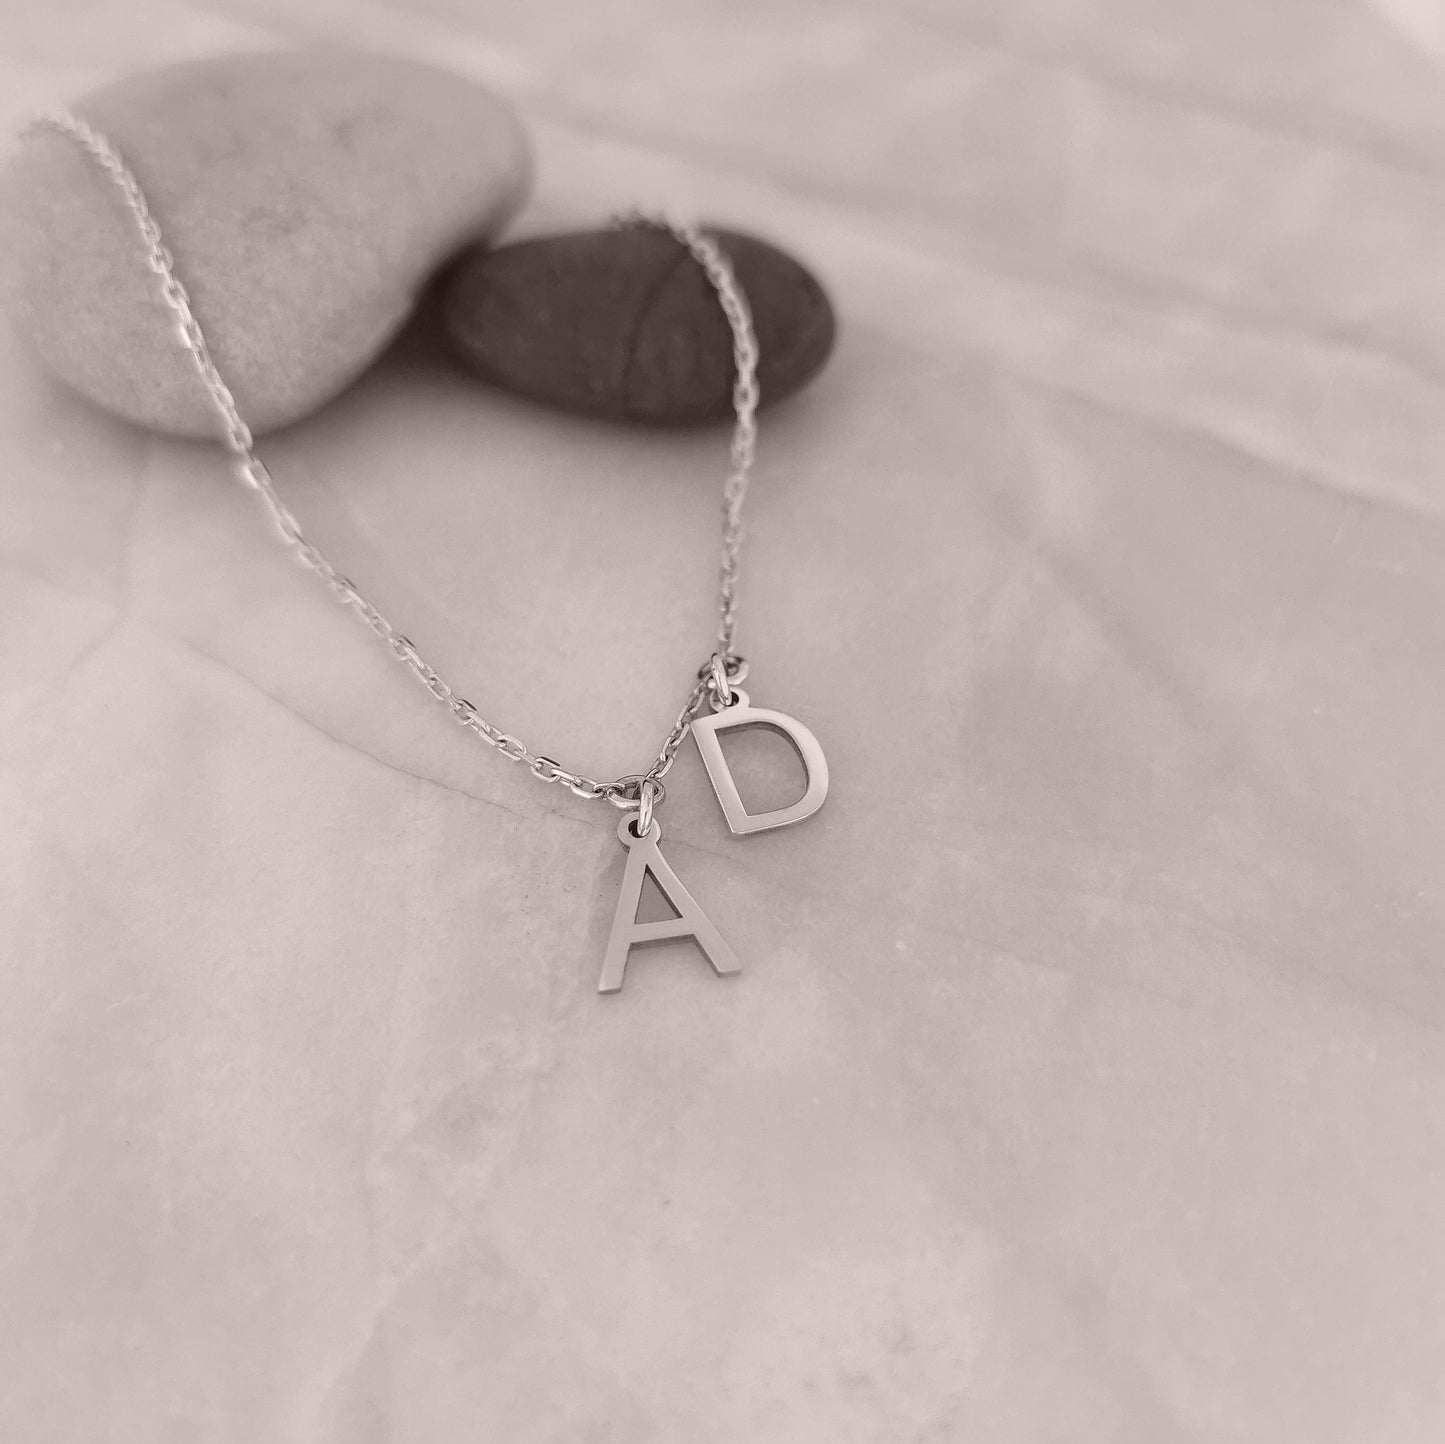 9ct White Gold Initial Necklace with Two Initials Charms Attached